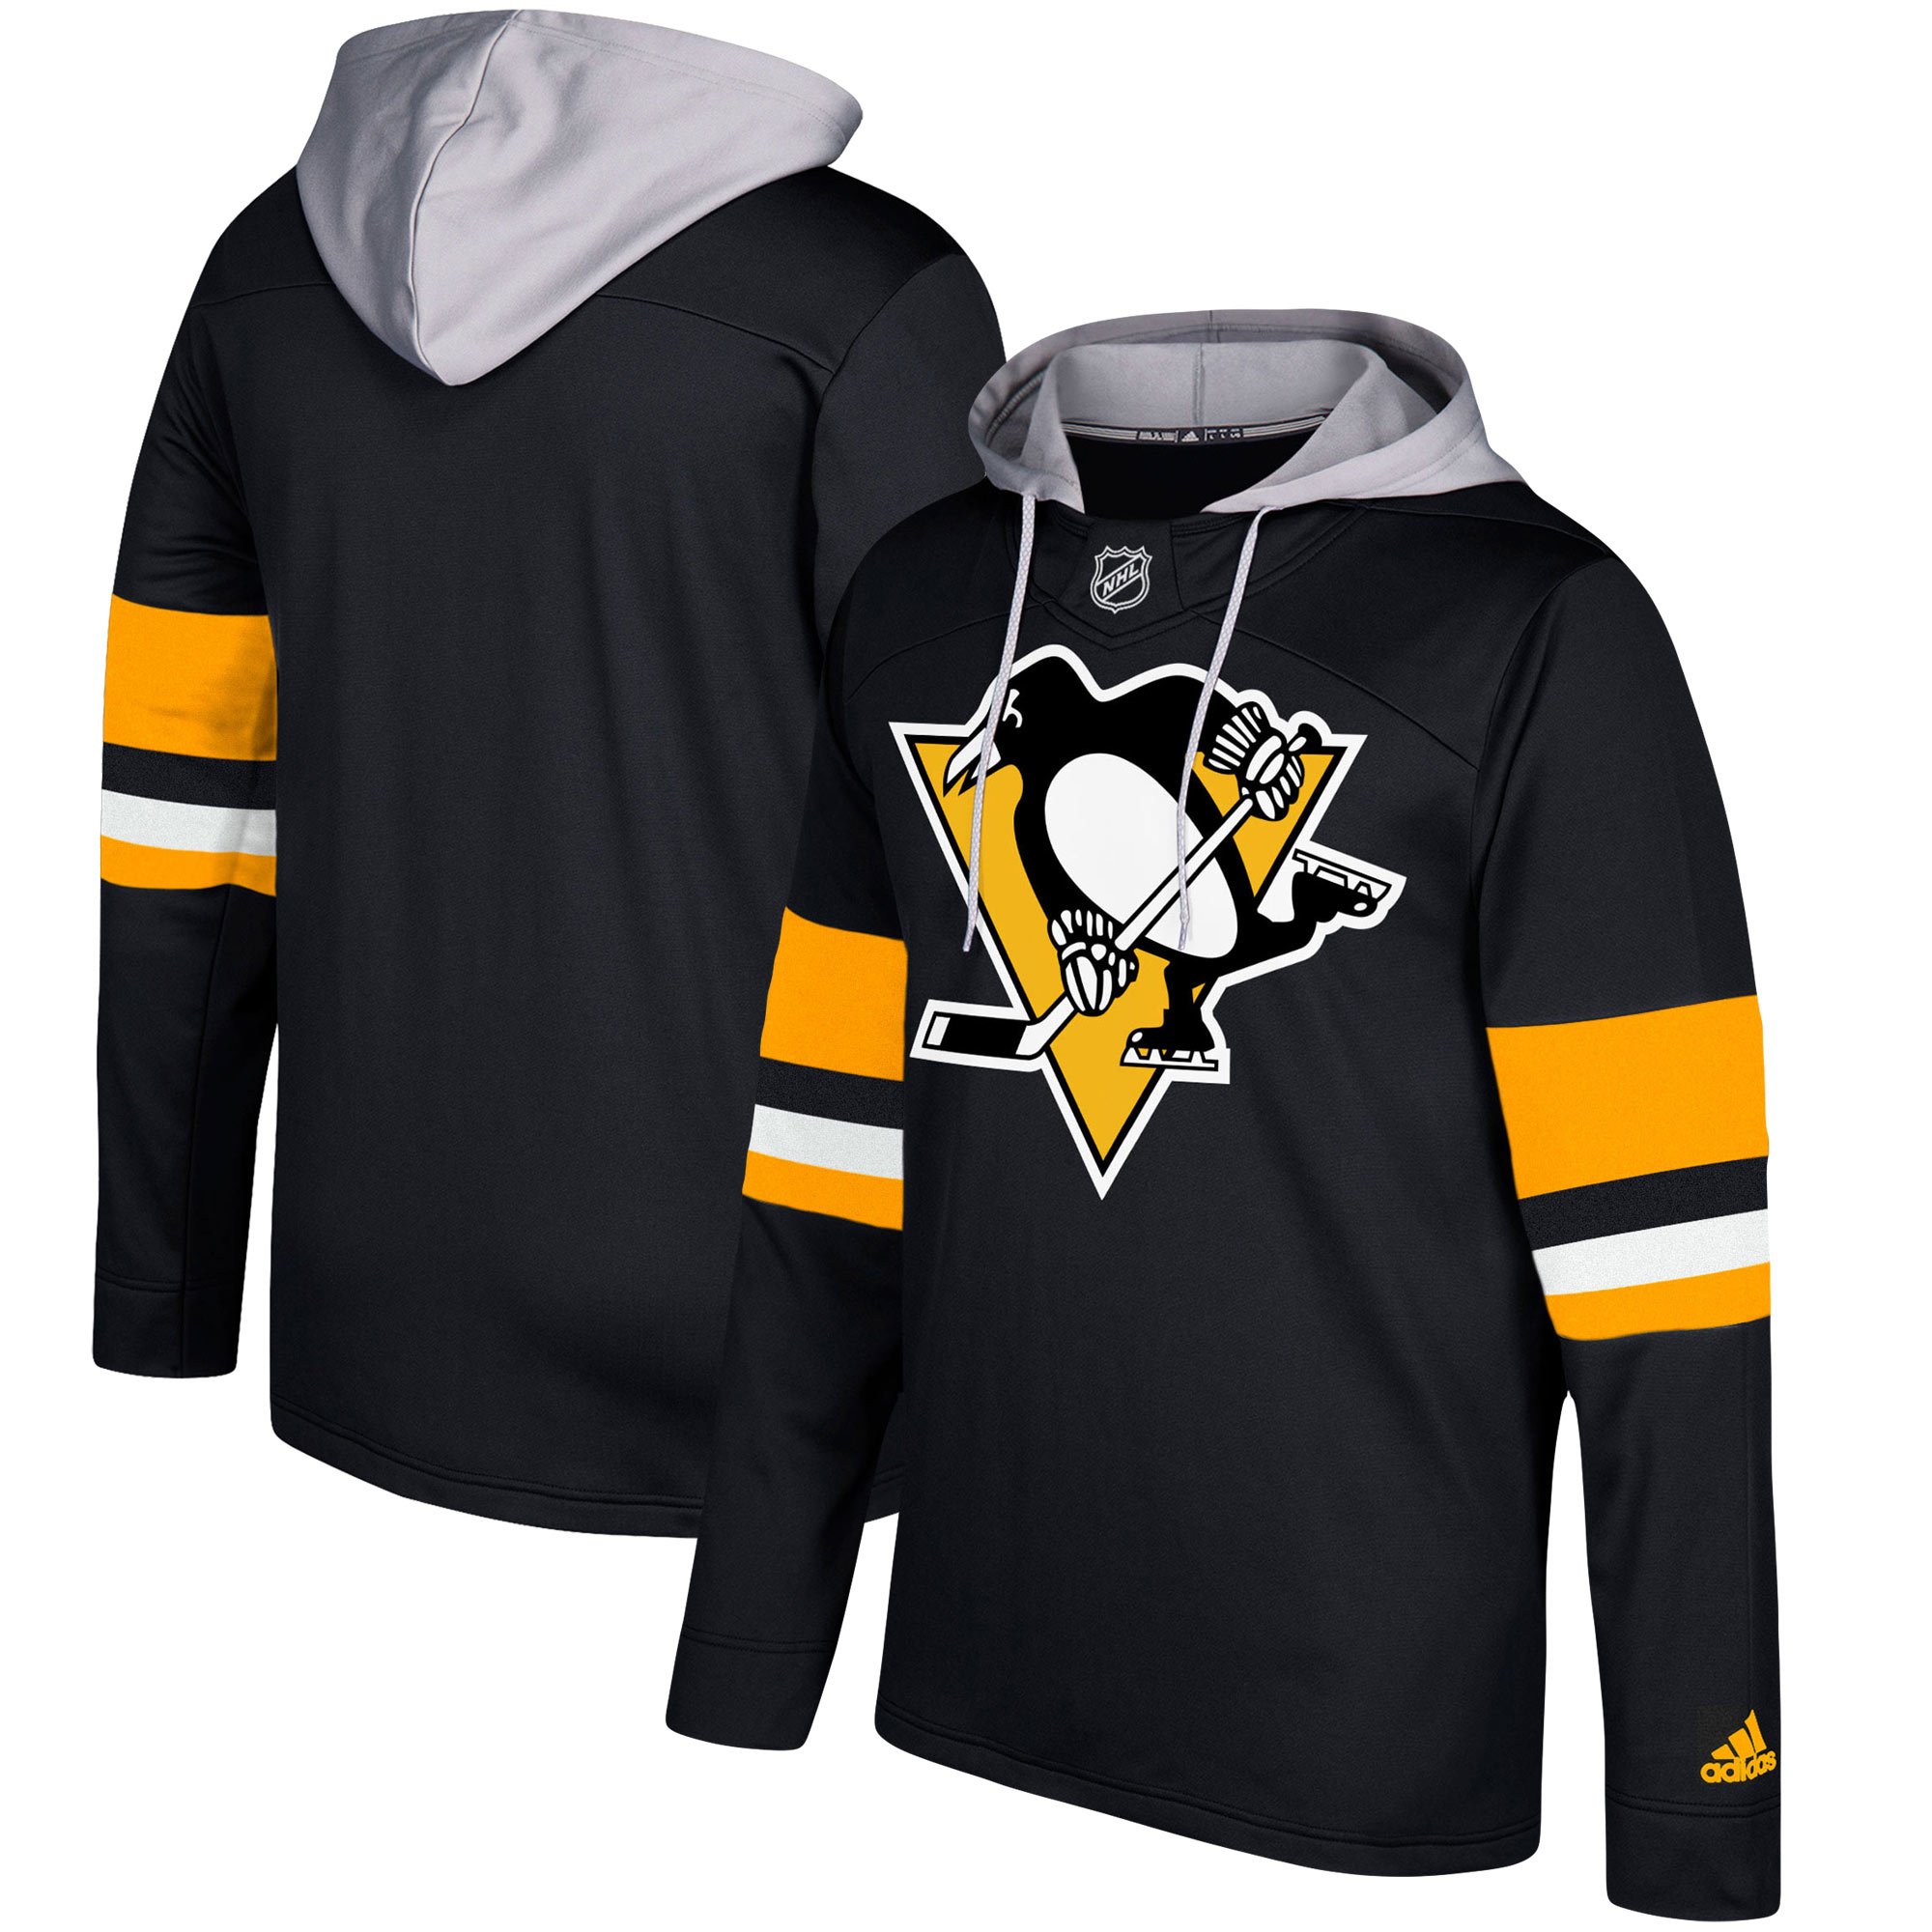 Men's Pittsburgh Penguins Adidas Black/Silver Jersey Pullover Hoodie